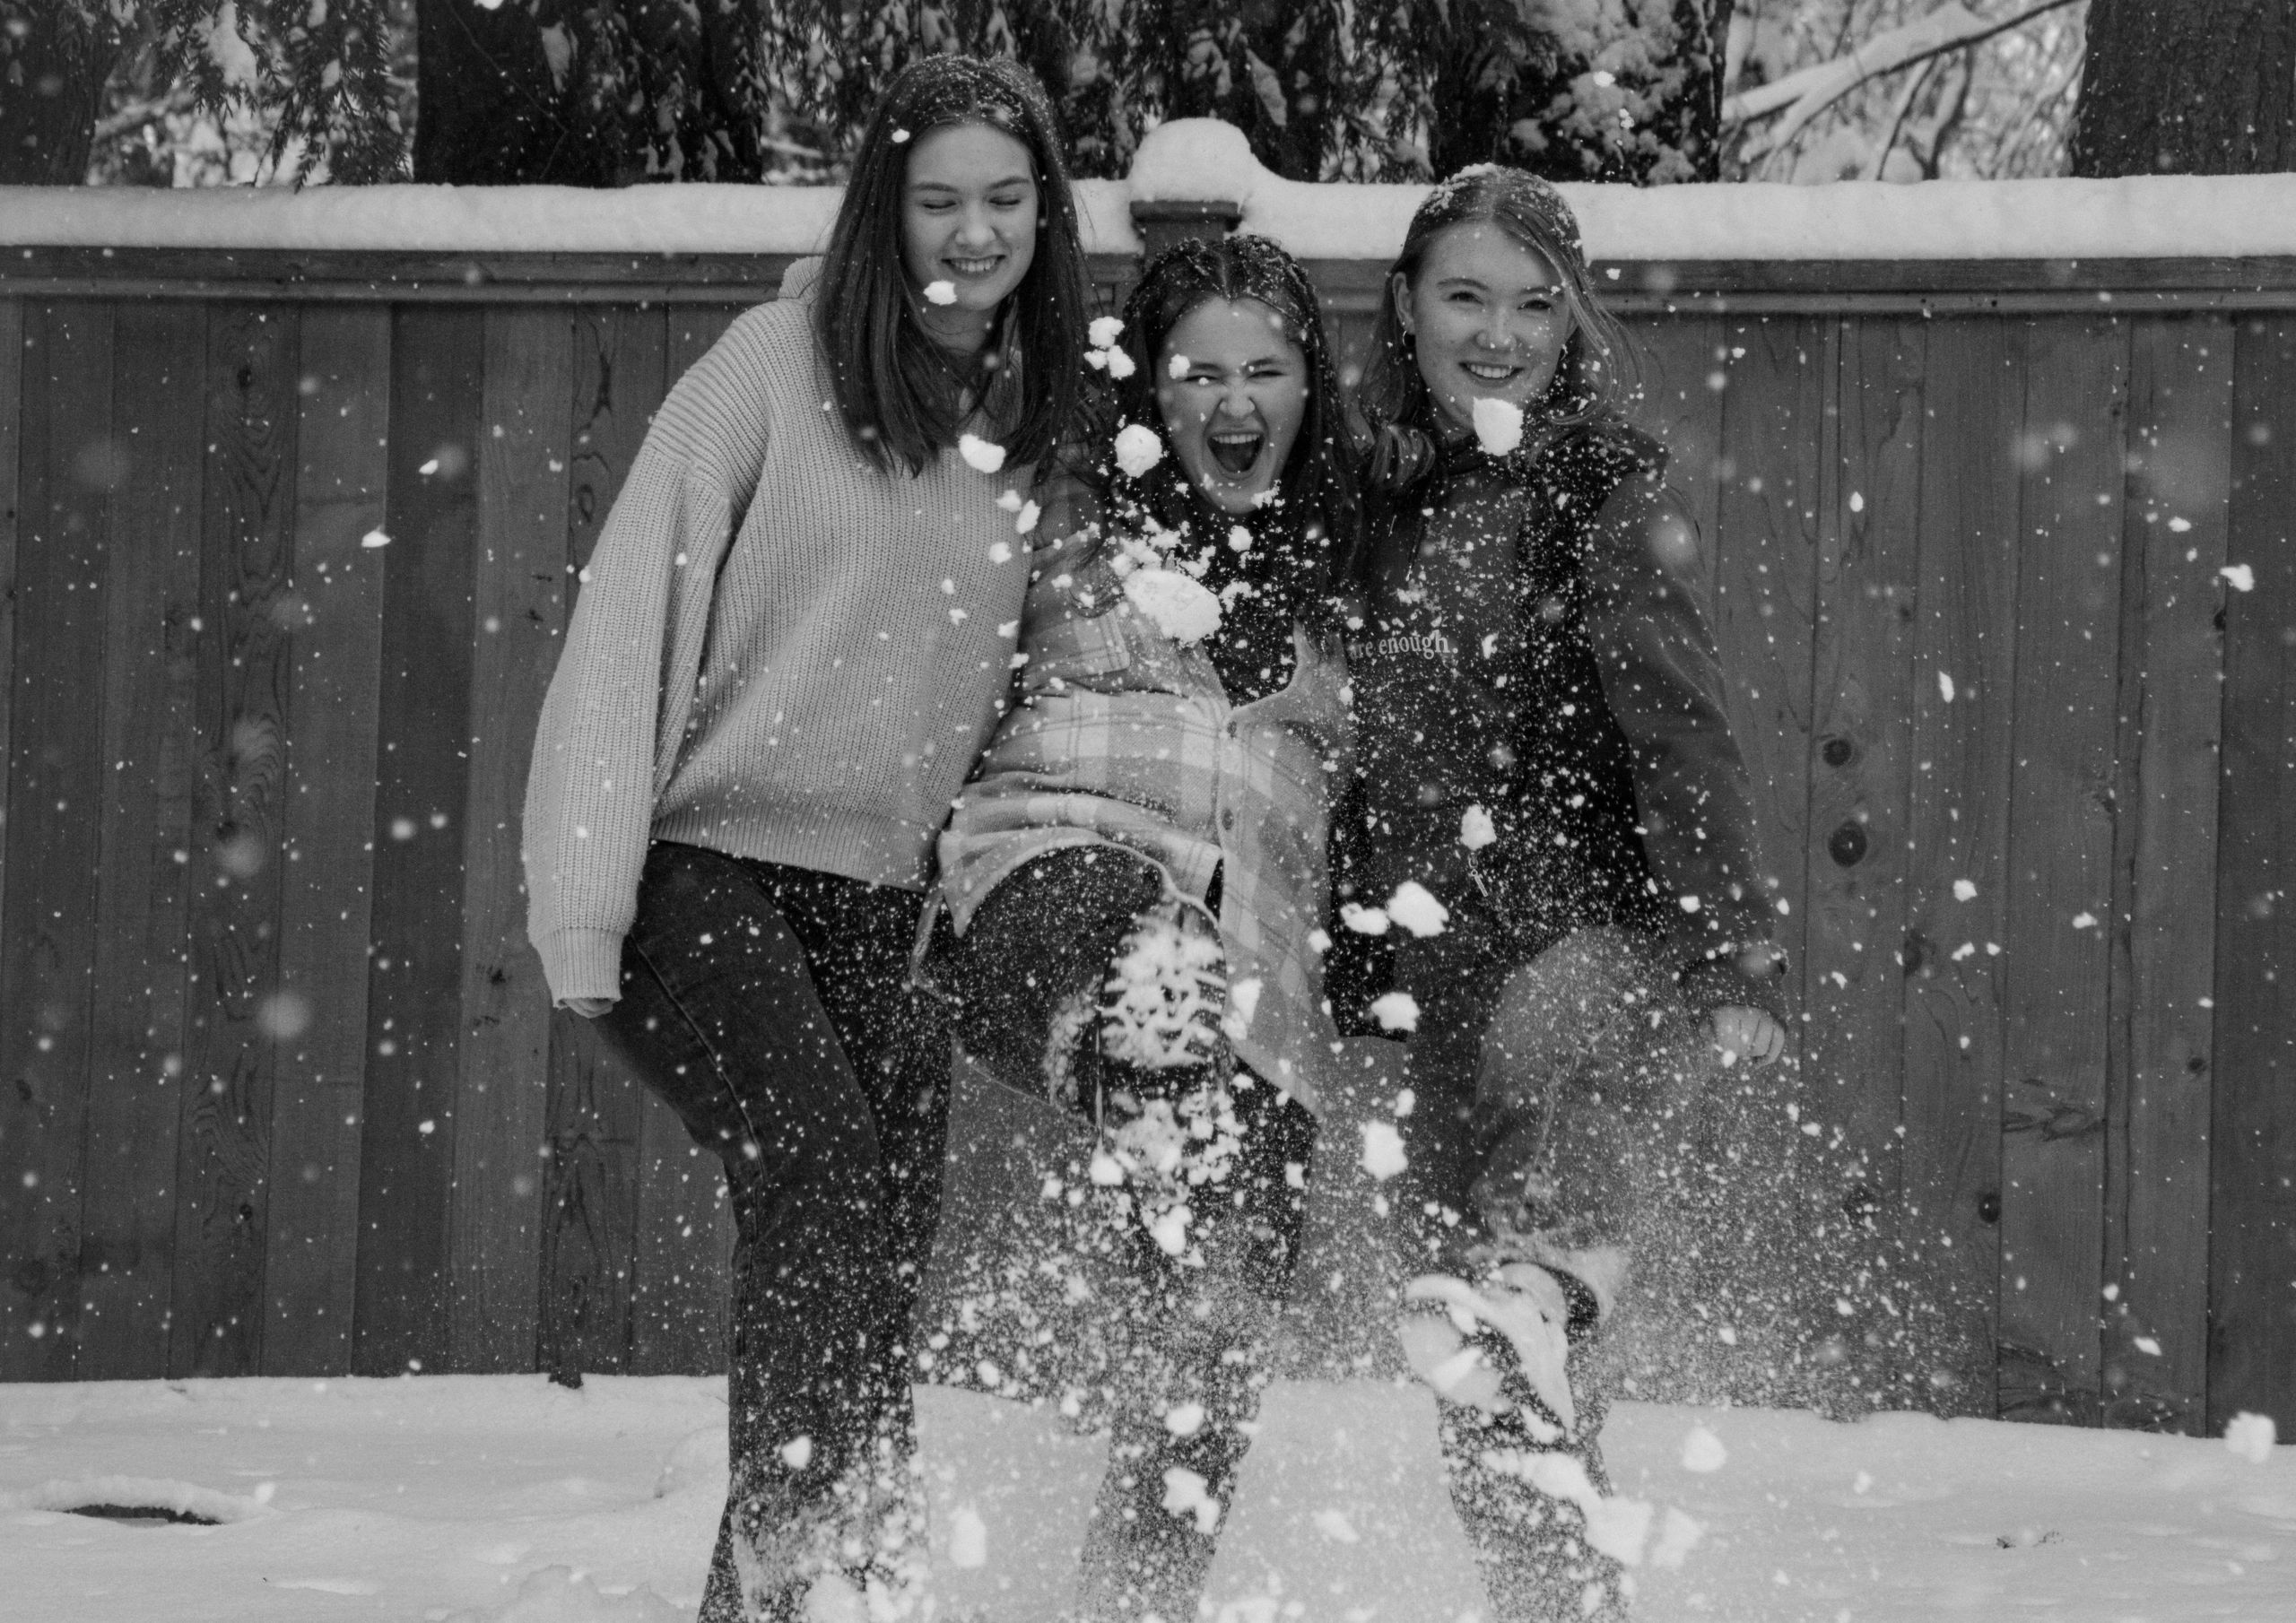 Three friends taking photos in the snow